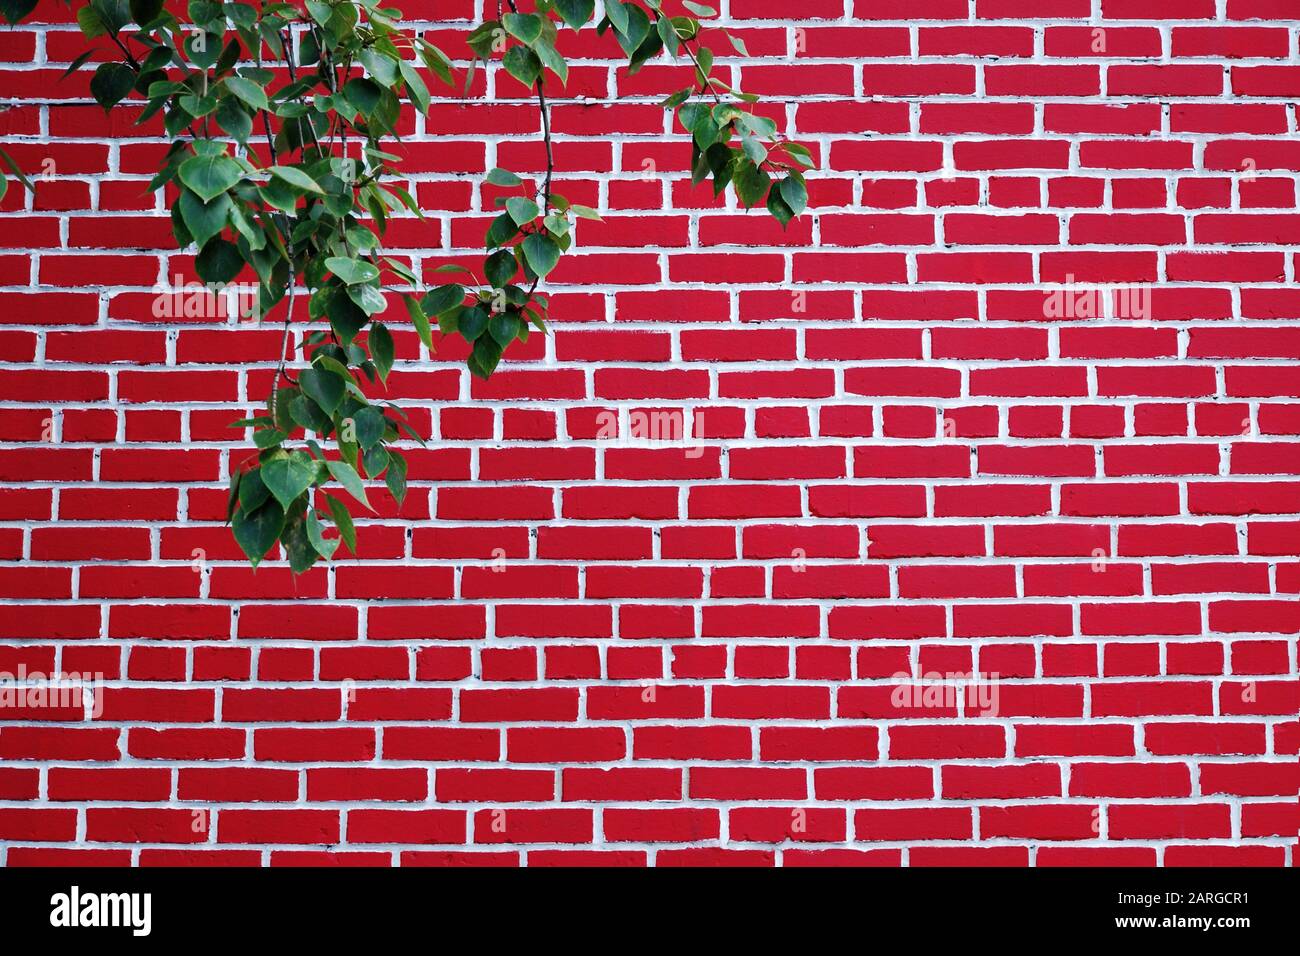 Bright red and white brick wall. Tree branch with green leaves in left upper corner. Stock Photo